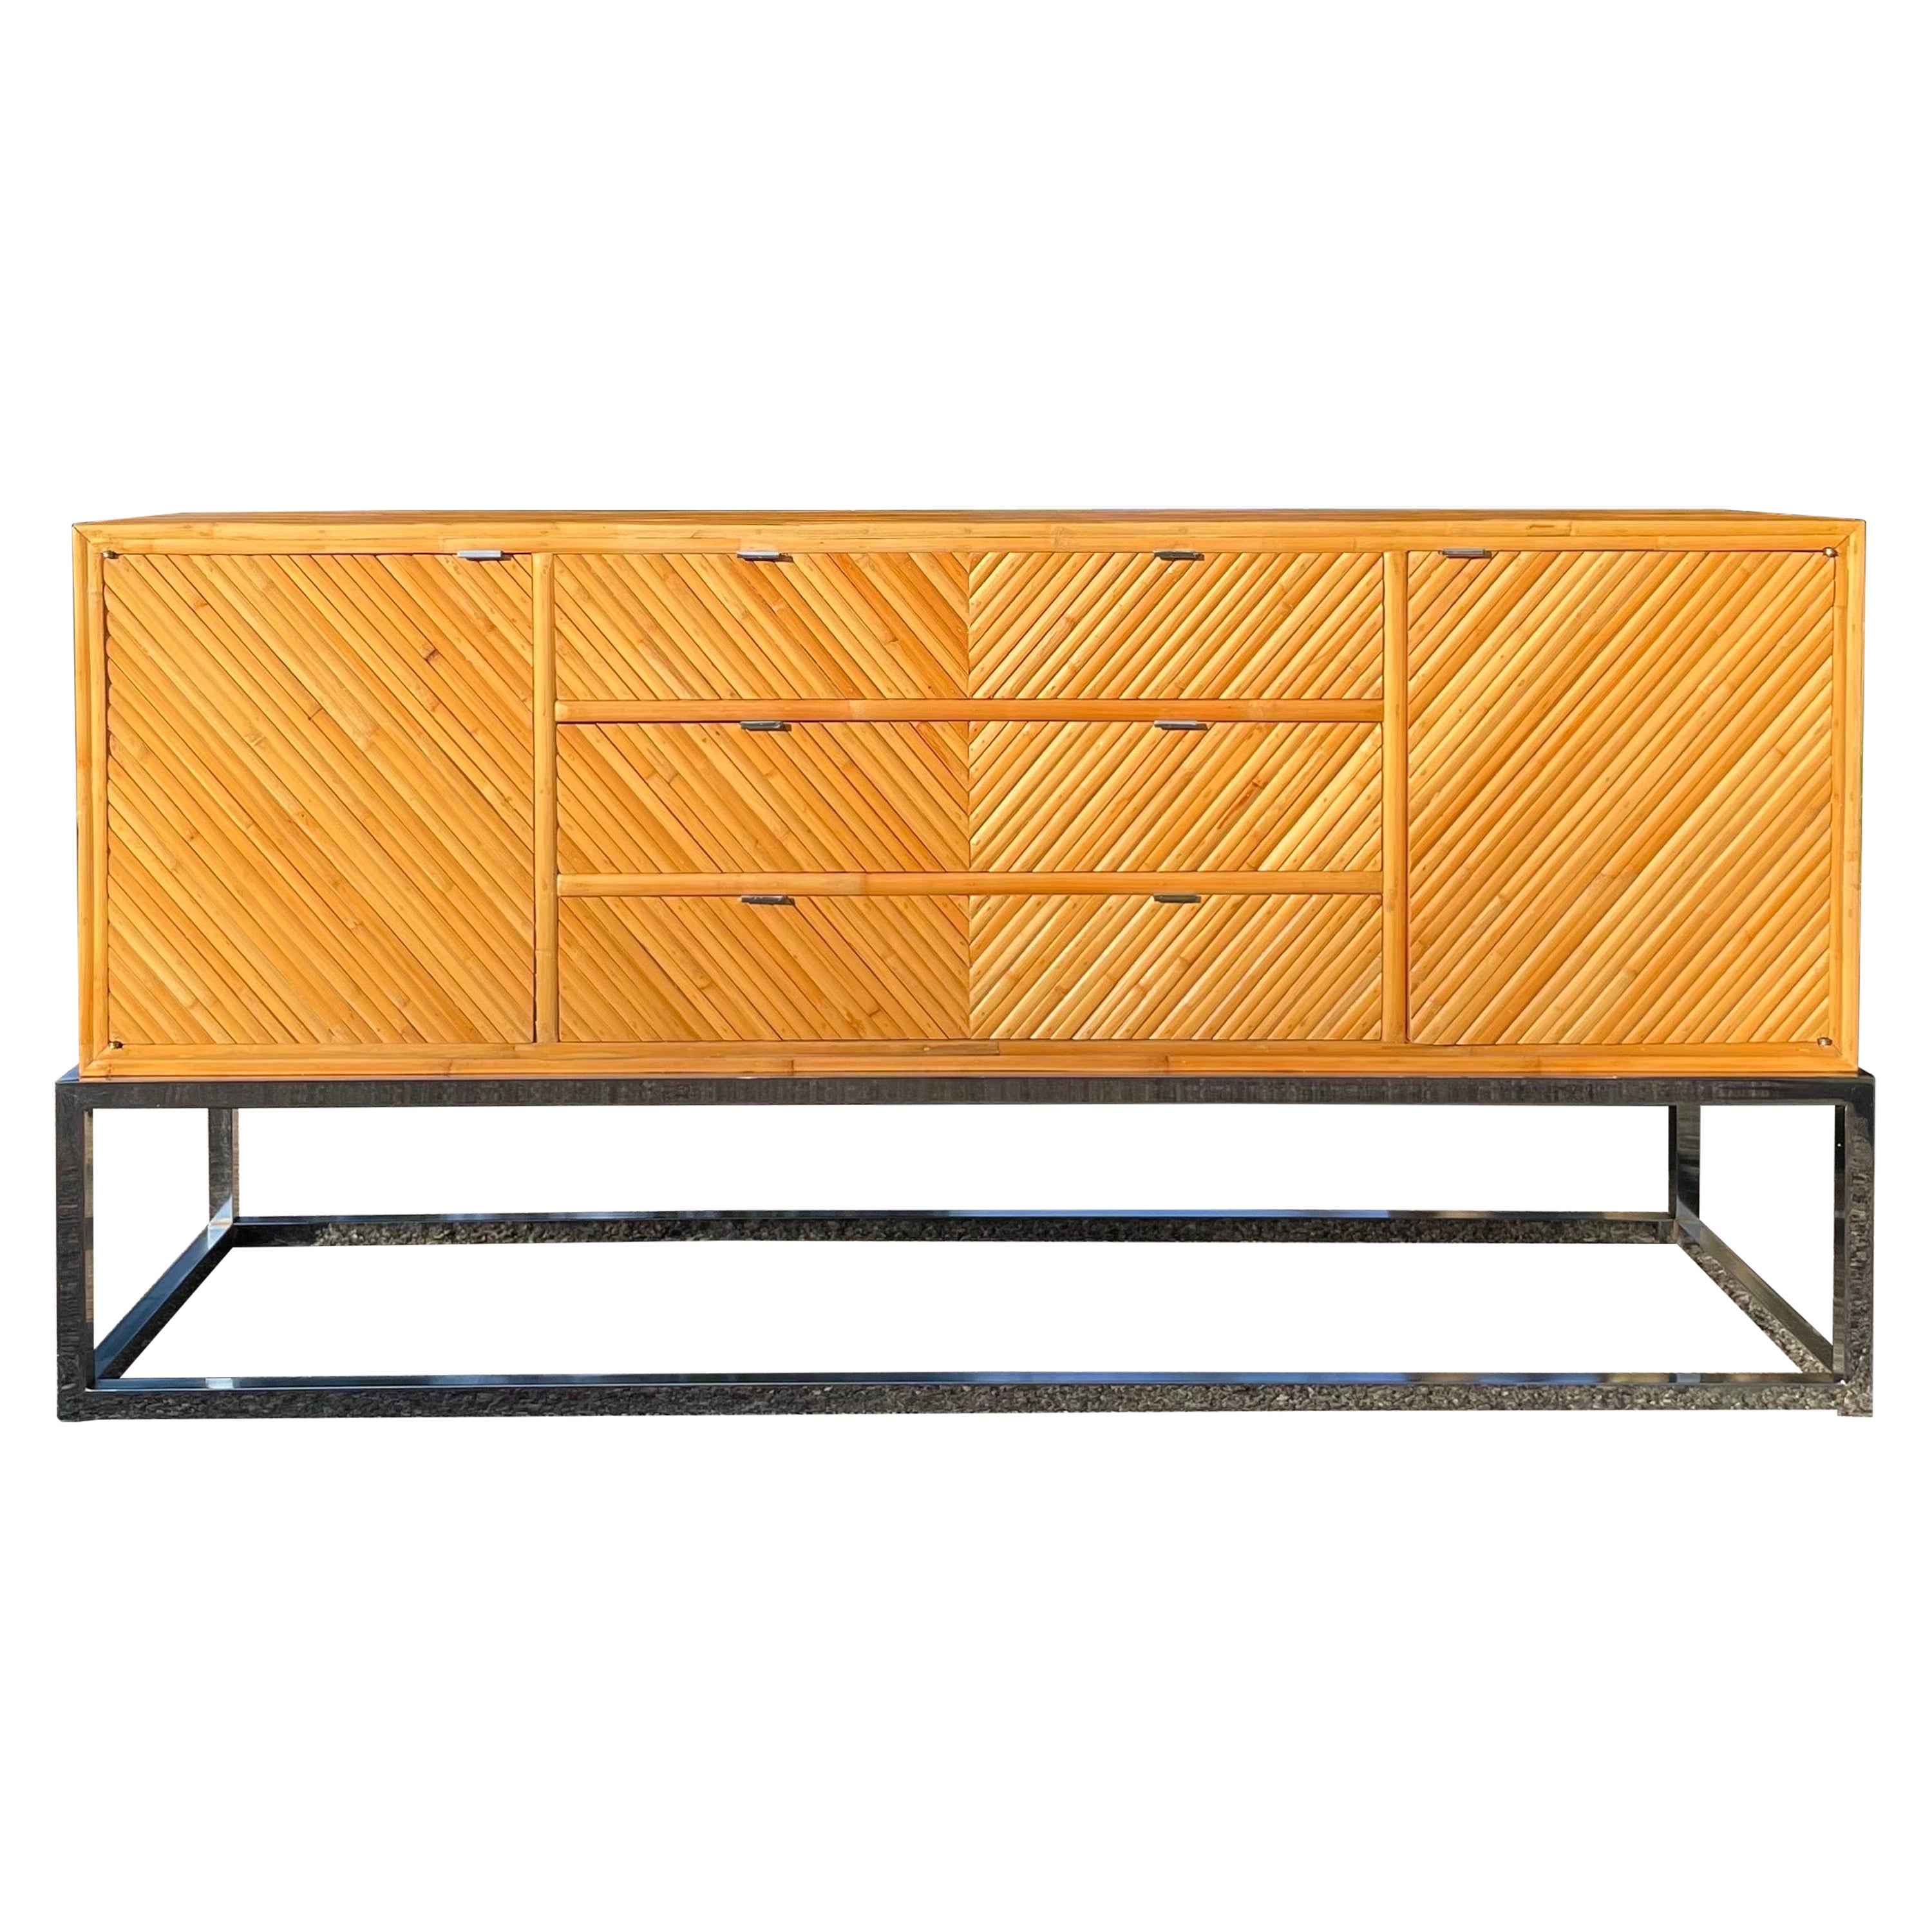 Milo Baughman Style Split Pencil Reed Bamboo and Chrome Credenza For Sale